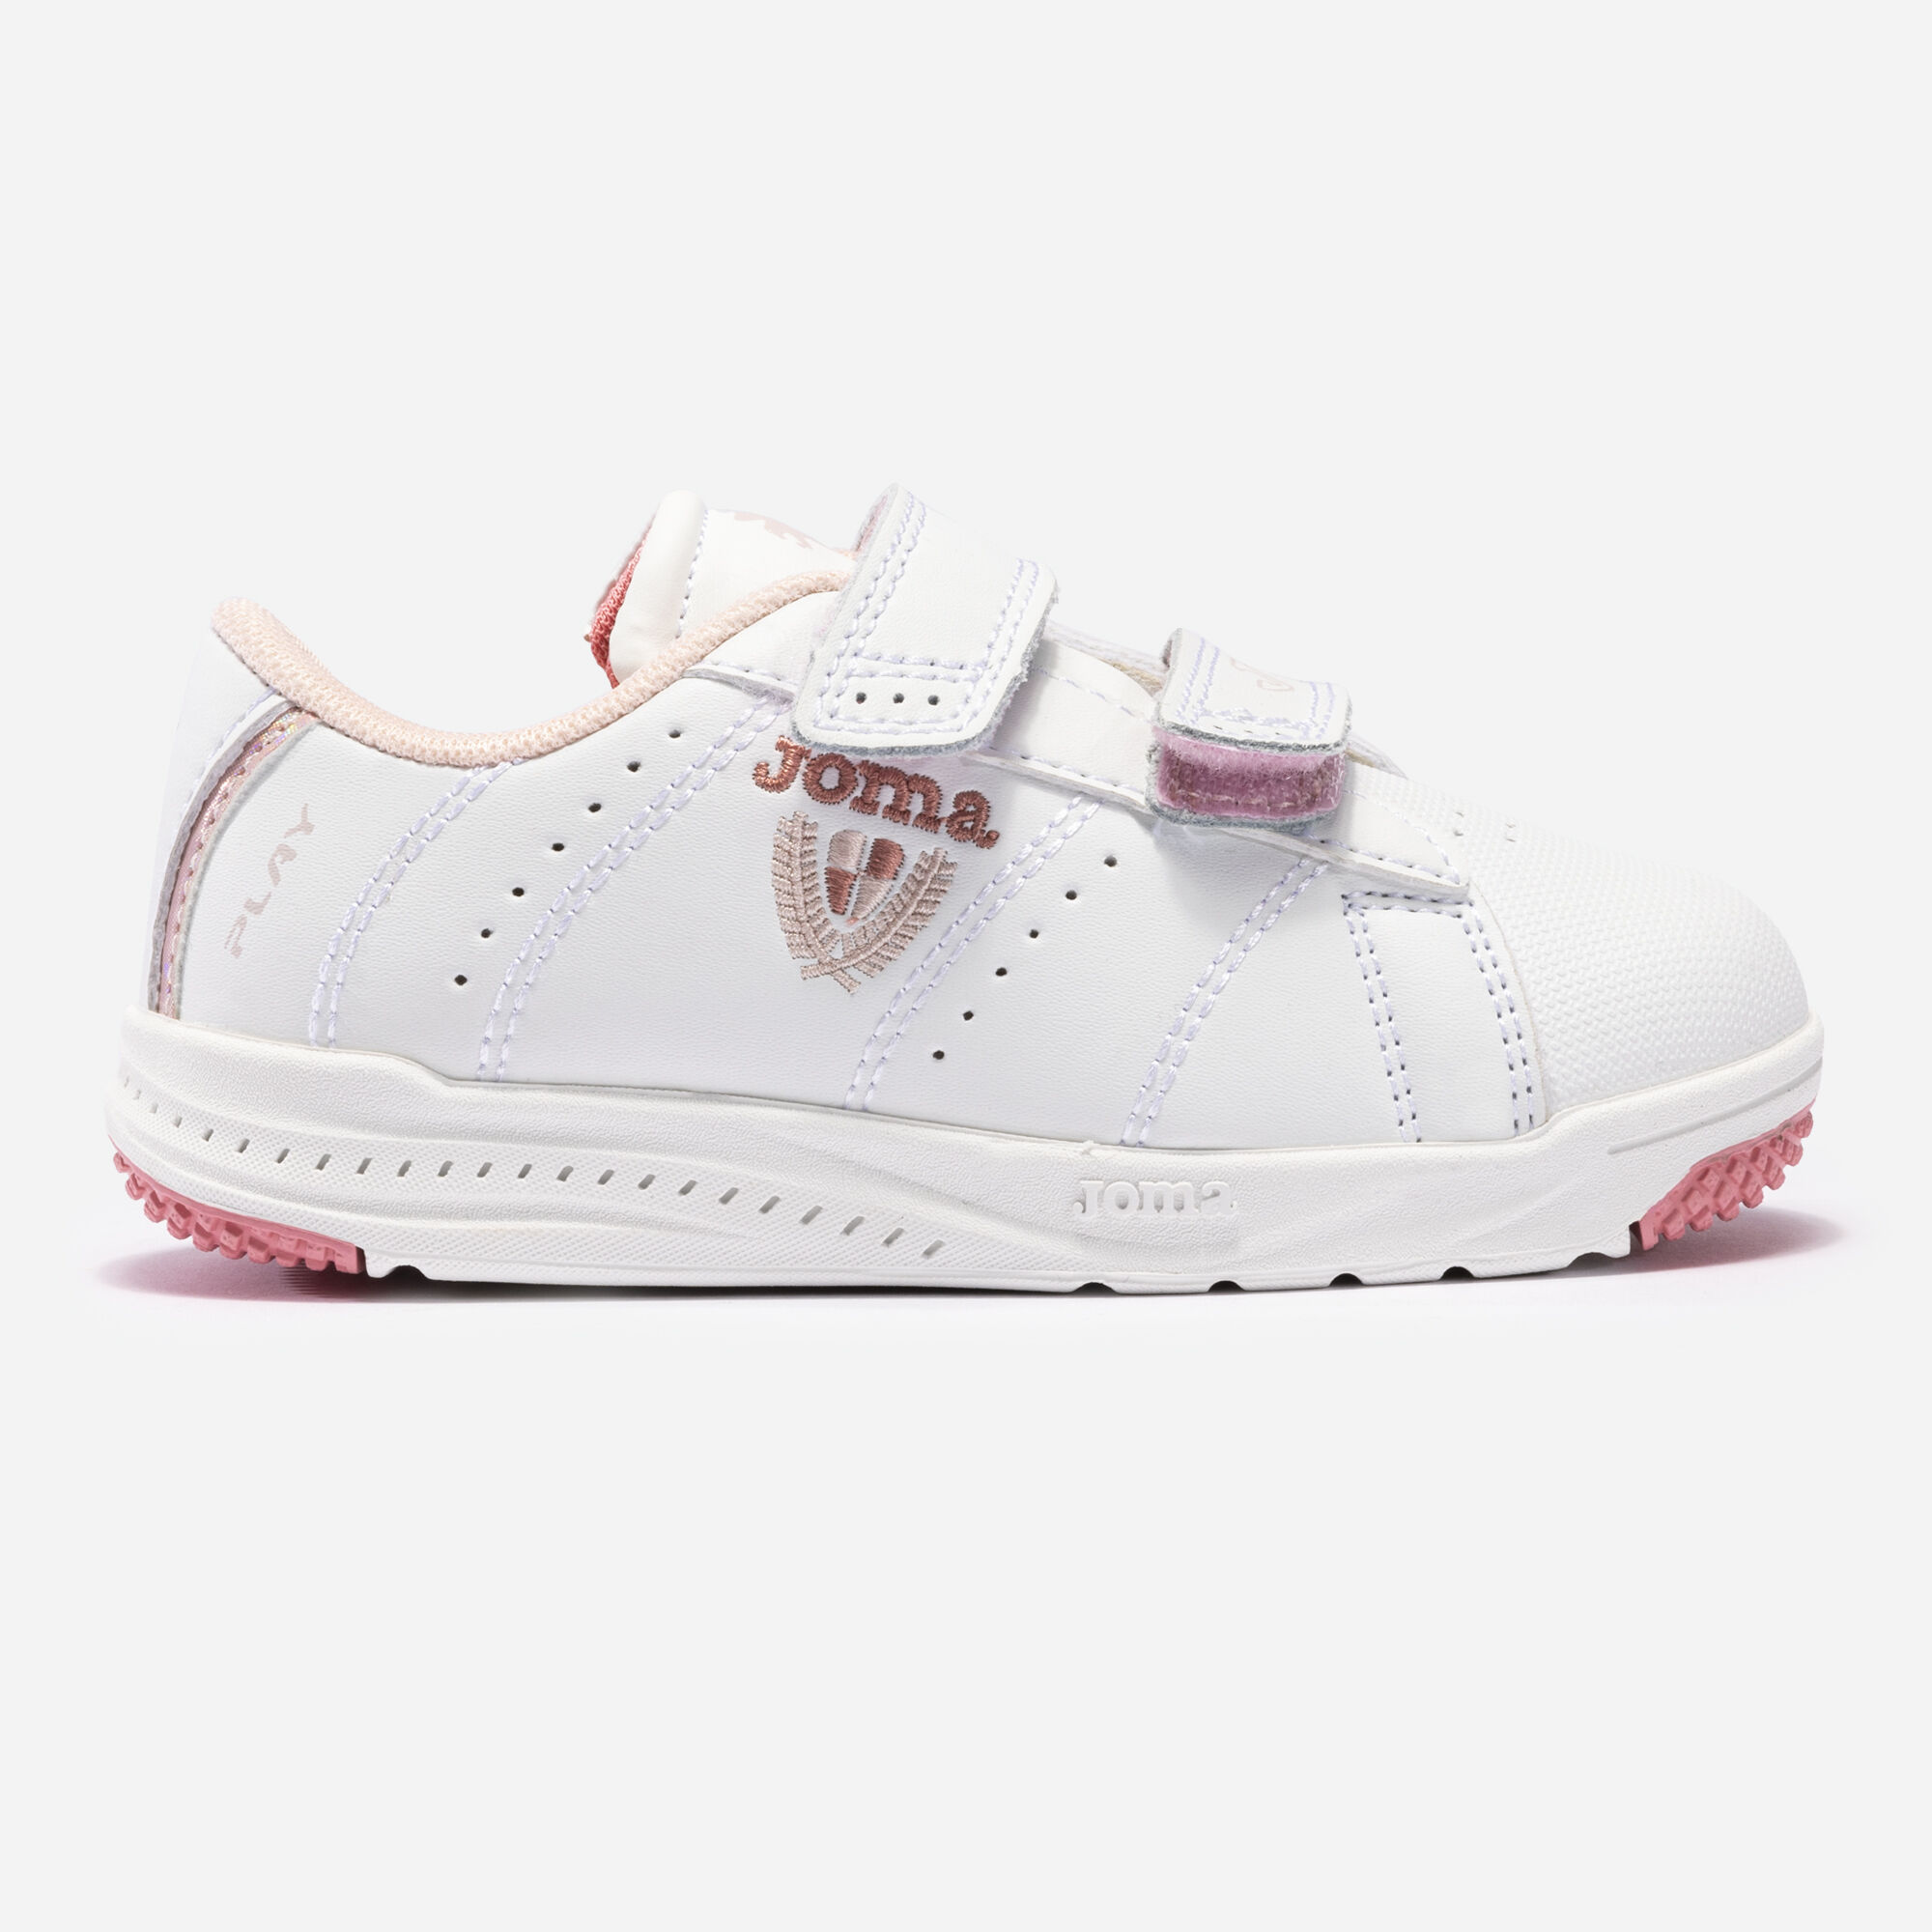 Casual shoes Play 22 junior white pink